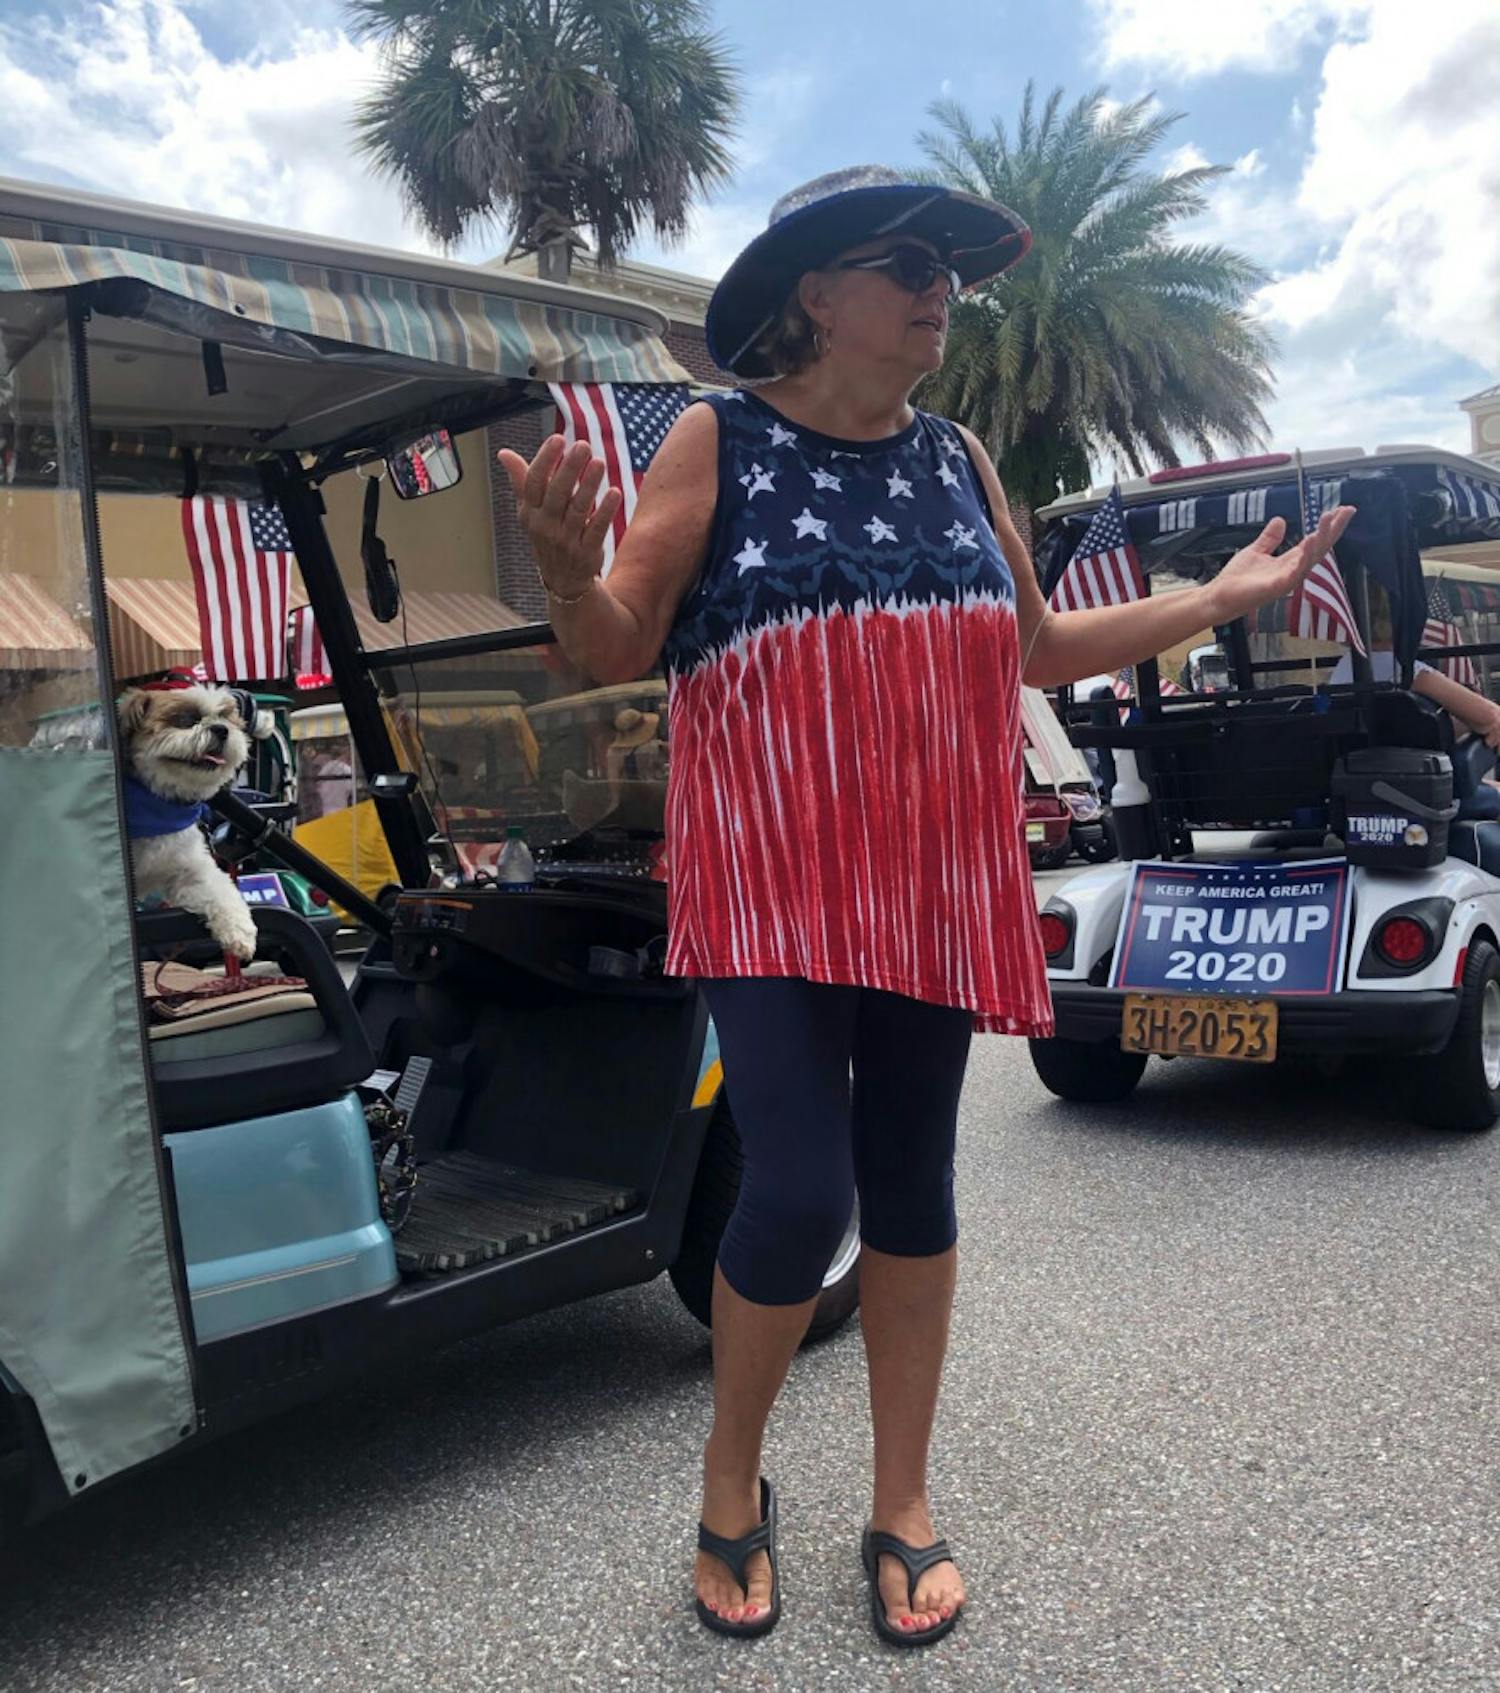 Kathy Slattery, 69, and her dog Samson, 8, waited to enter the event in a line of golf carts waving Trump flags. &nbsp;